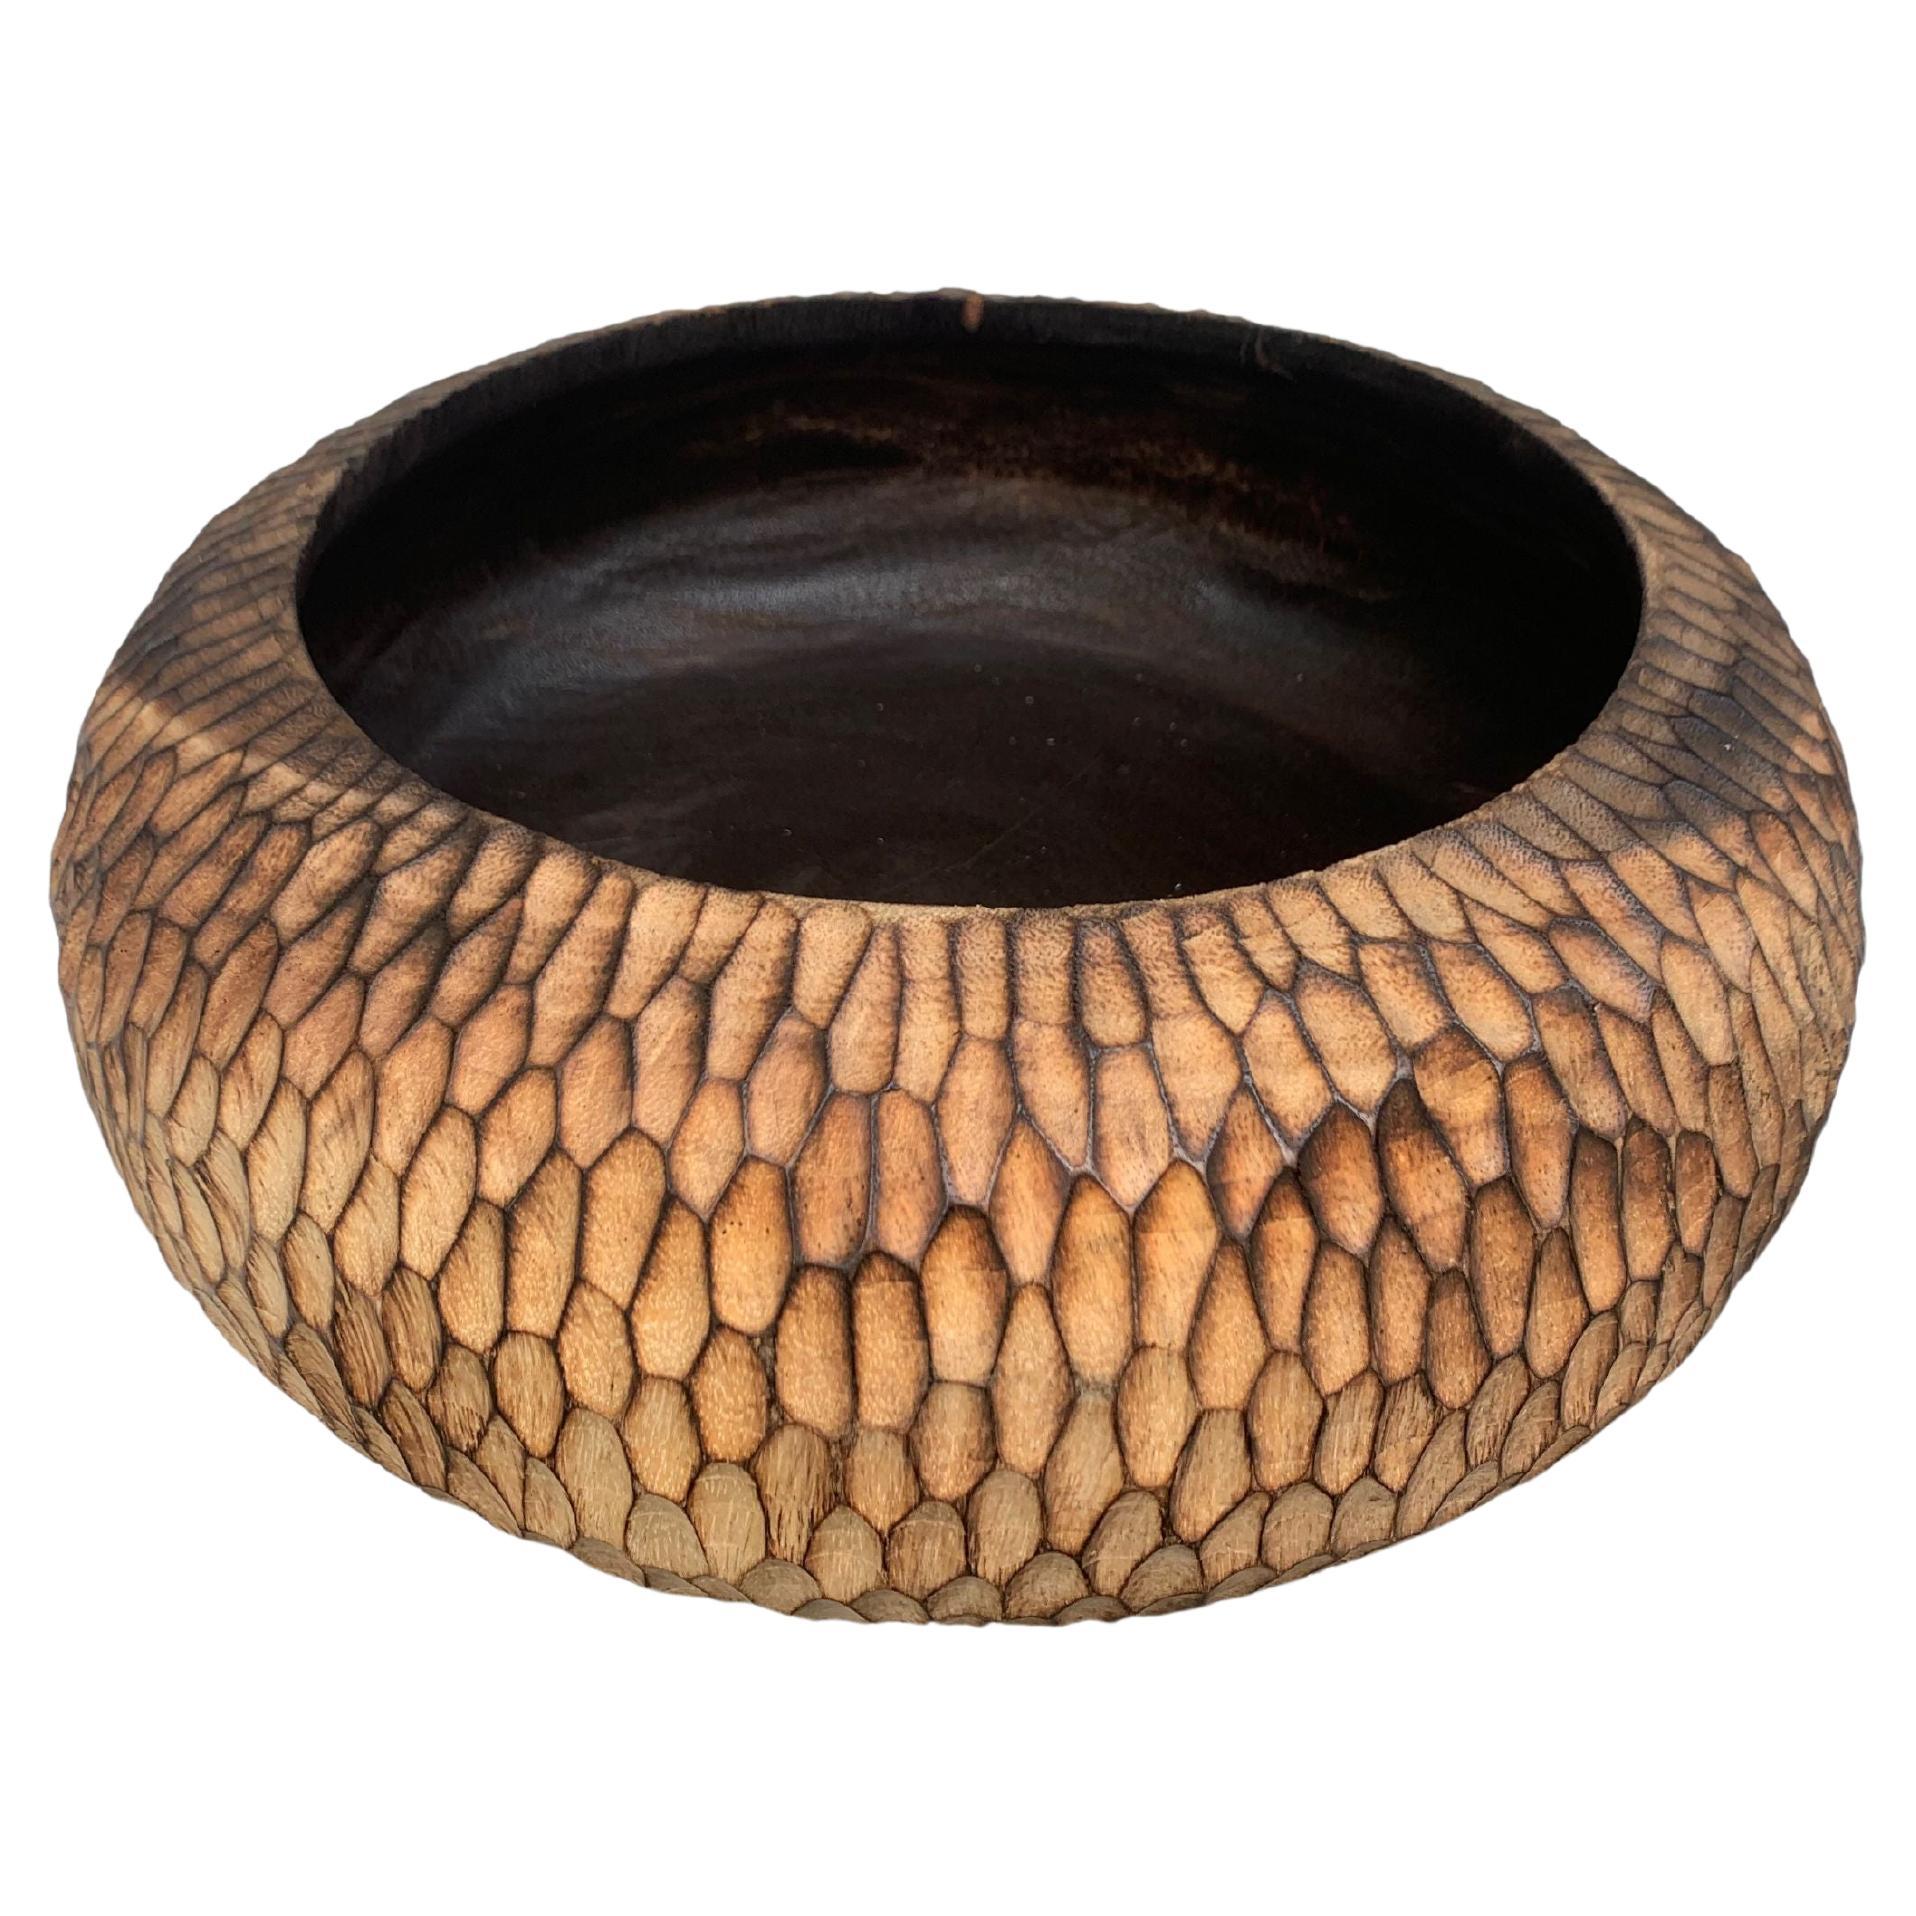 Solid Mango Wood Bowl with Hand-Hewn Detailing and Burnt Detailing